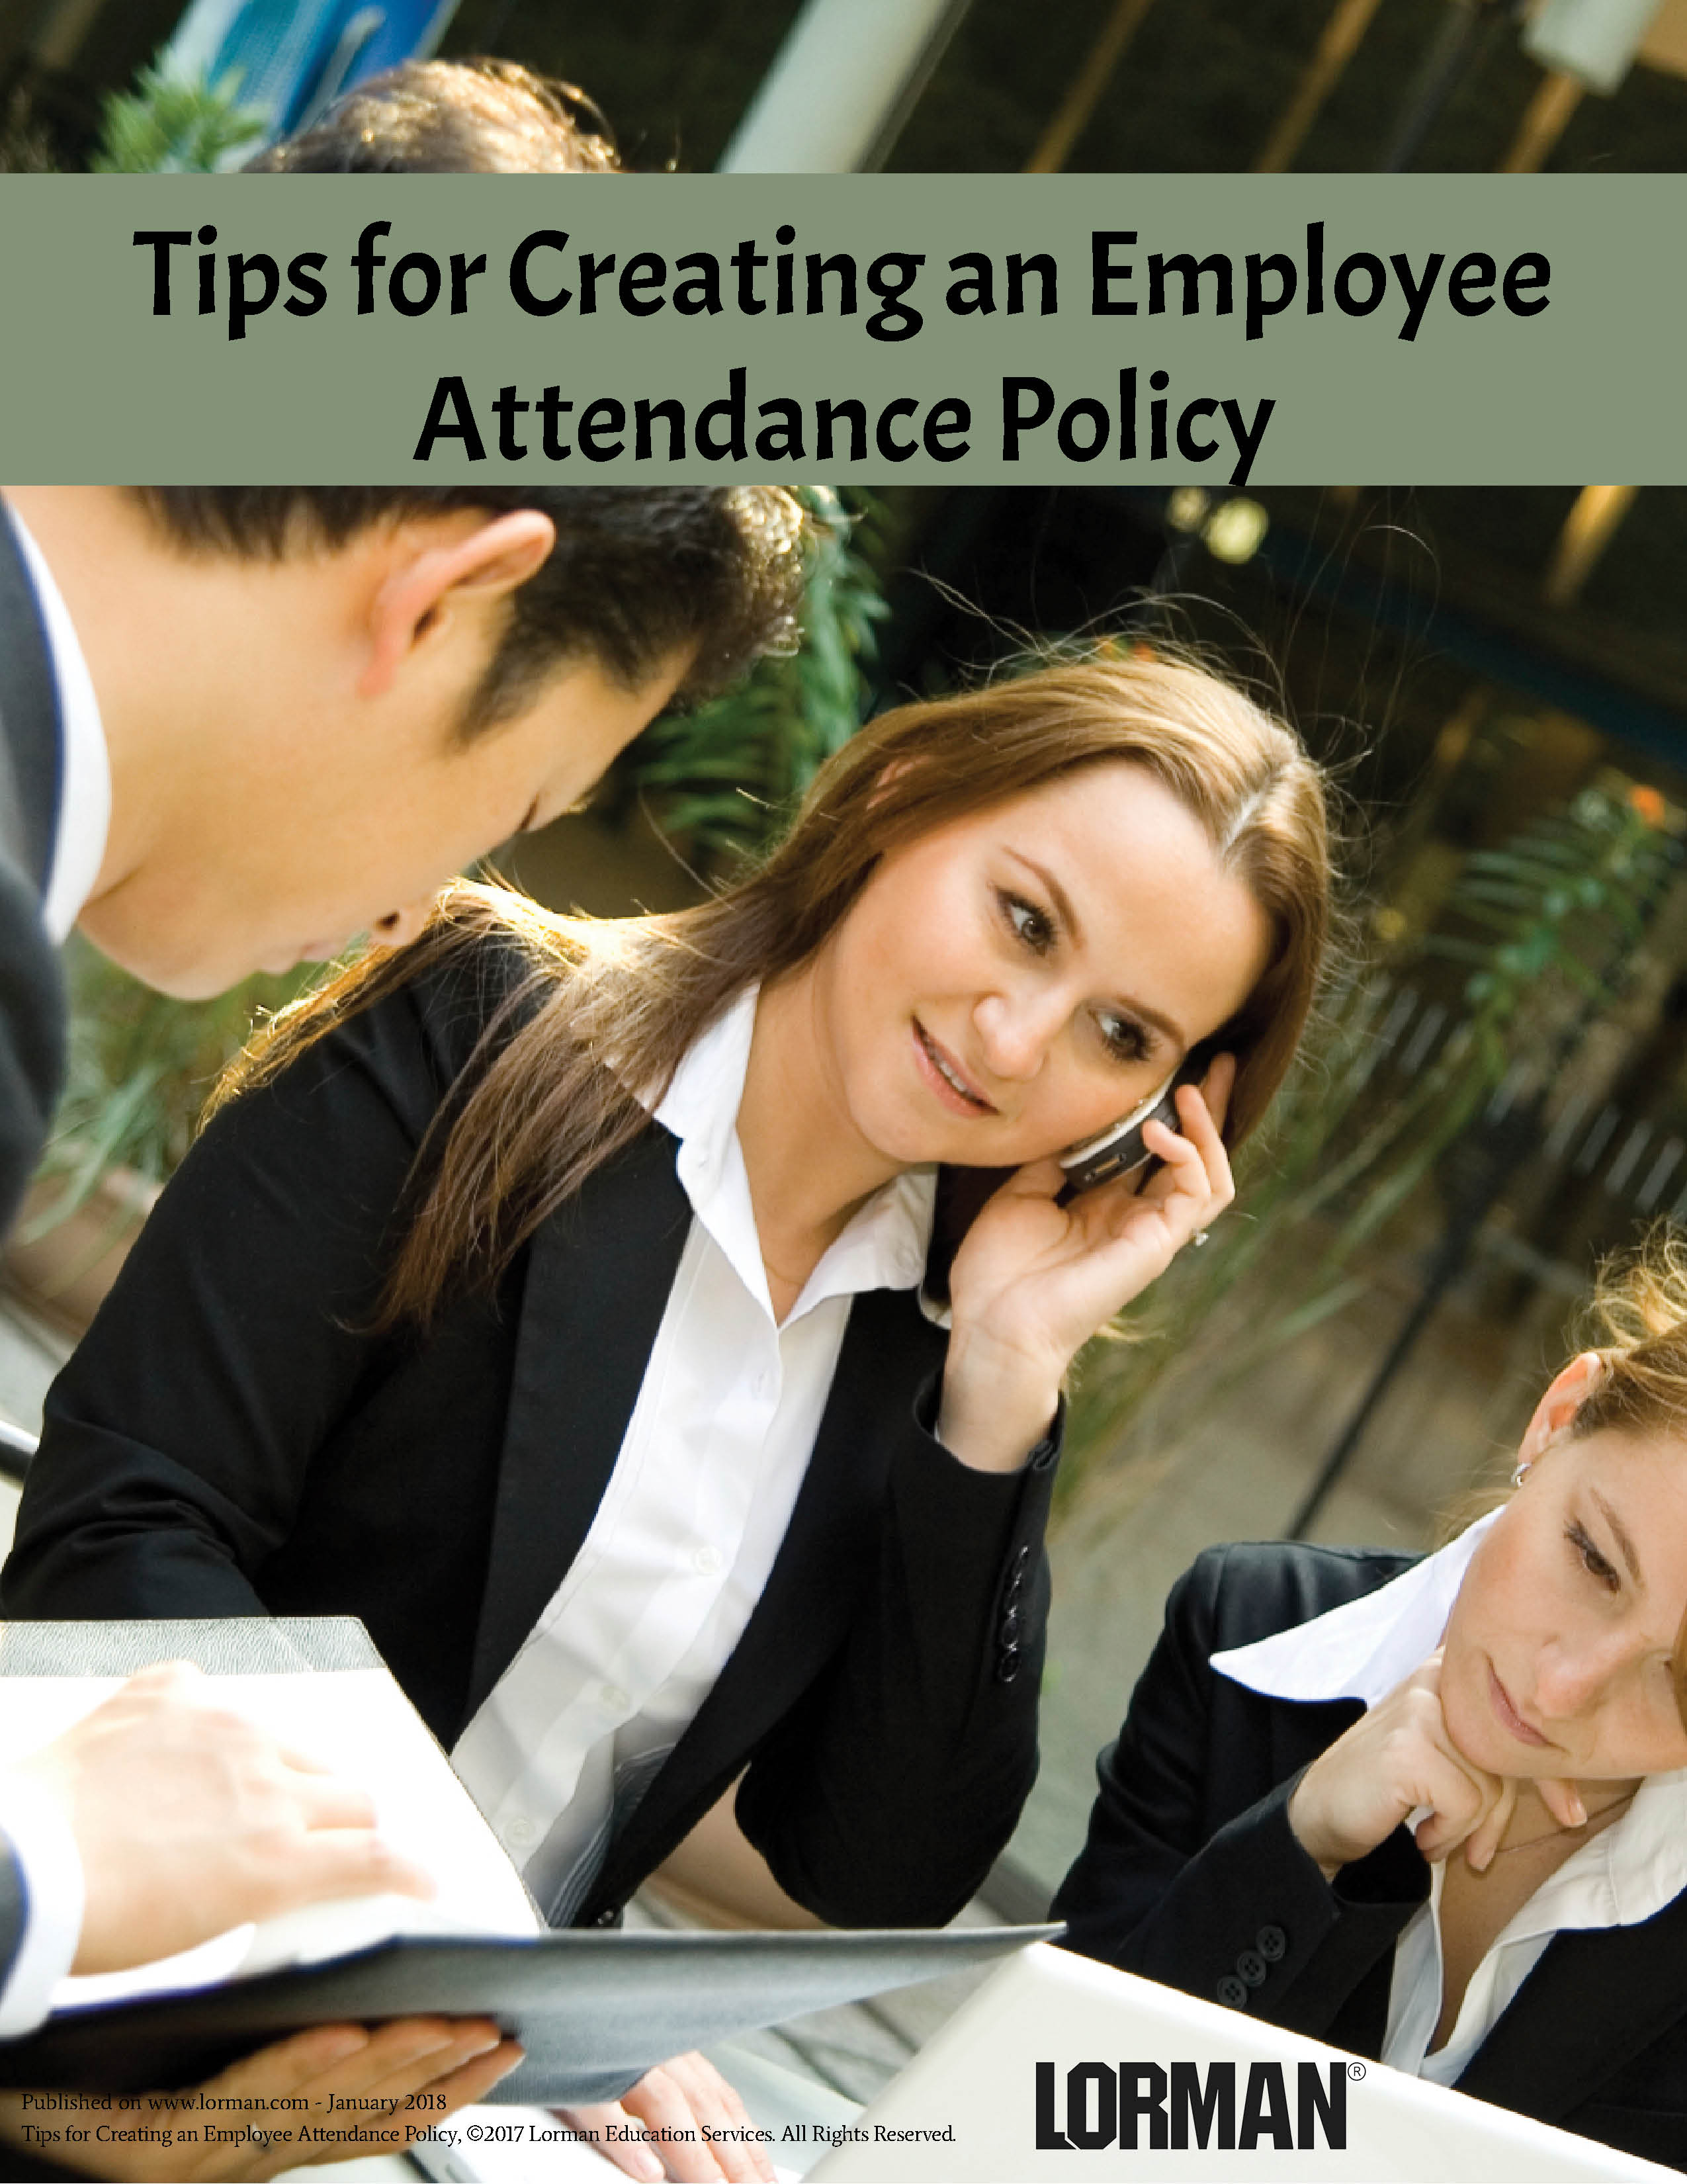 Tips for Creating an Employee Attendance Policy